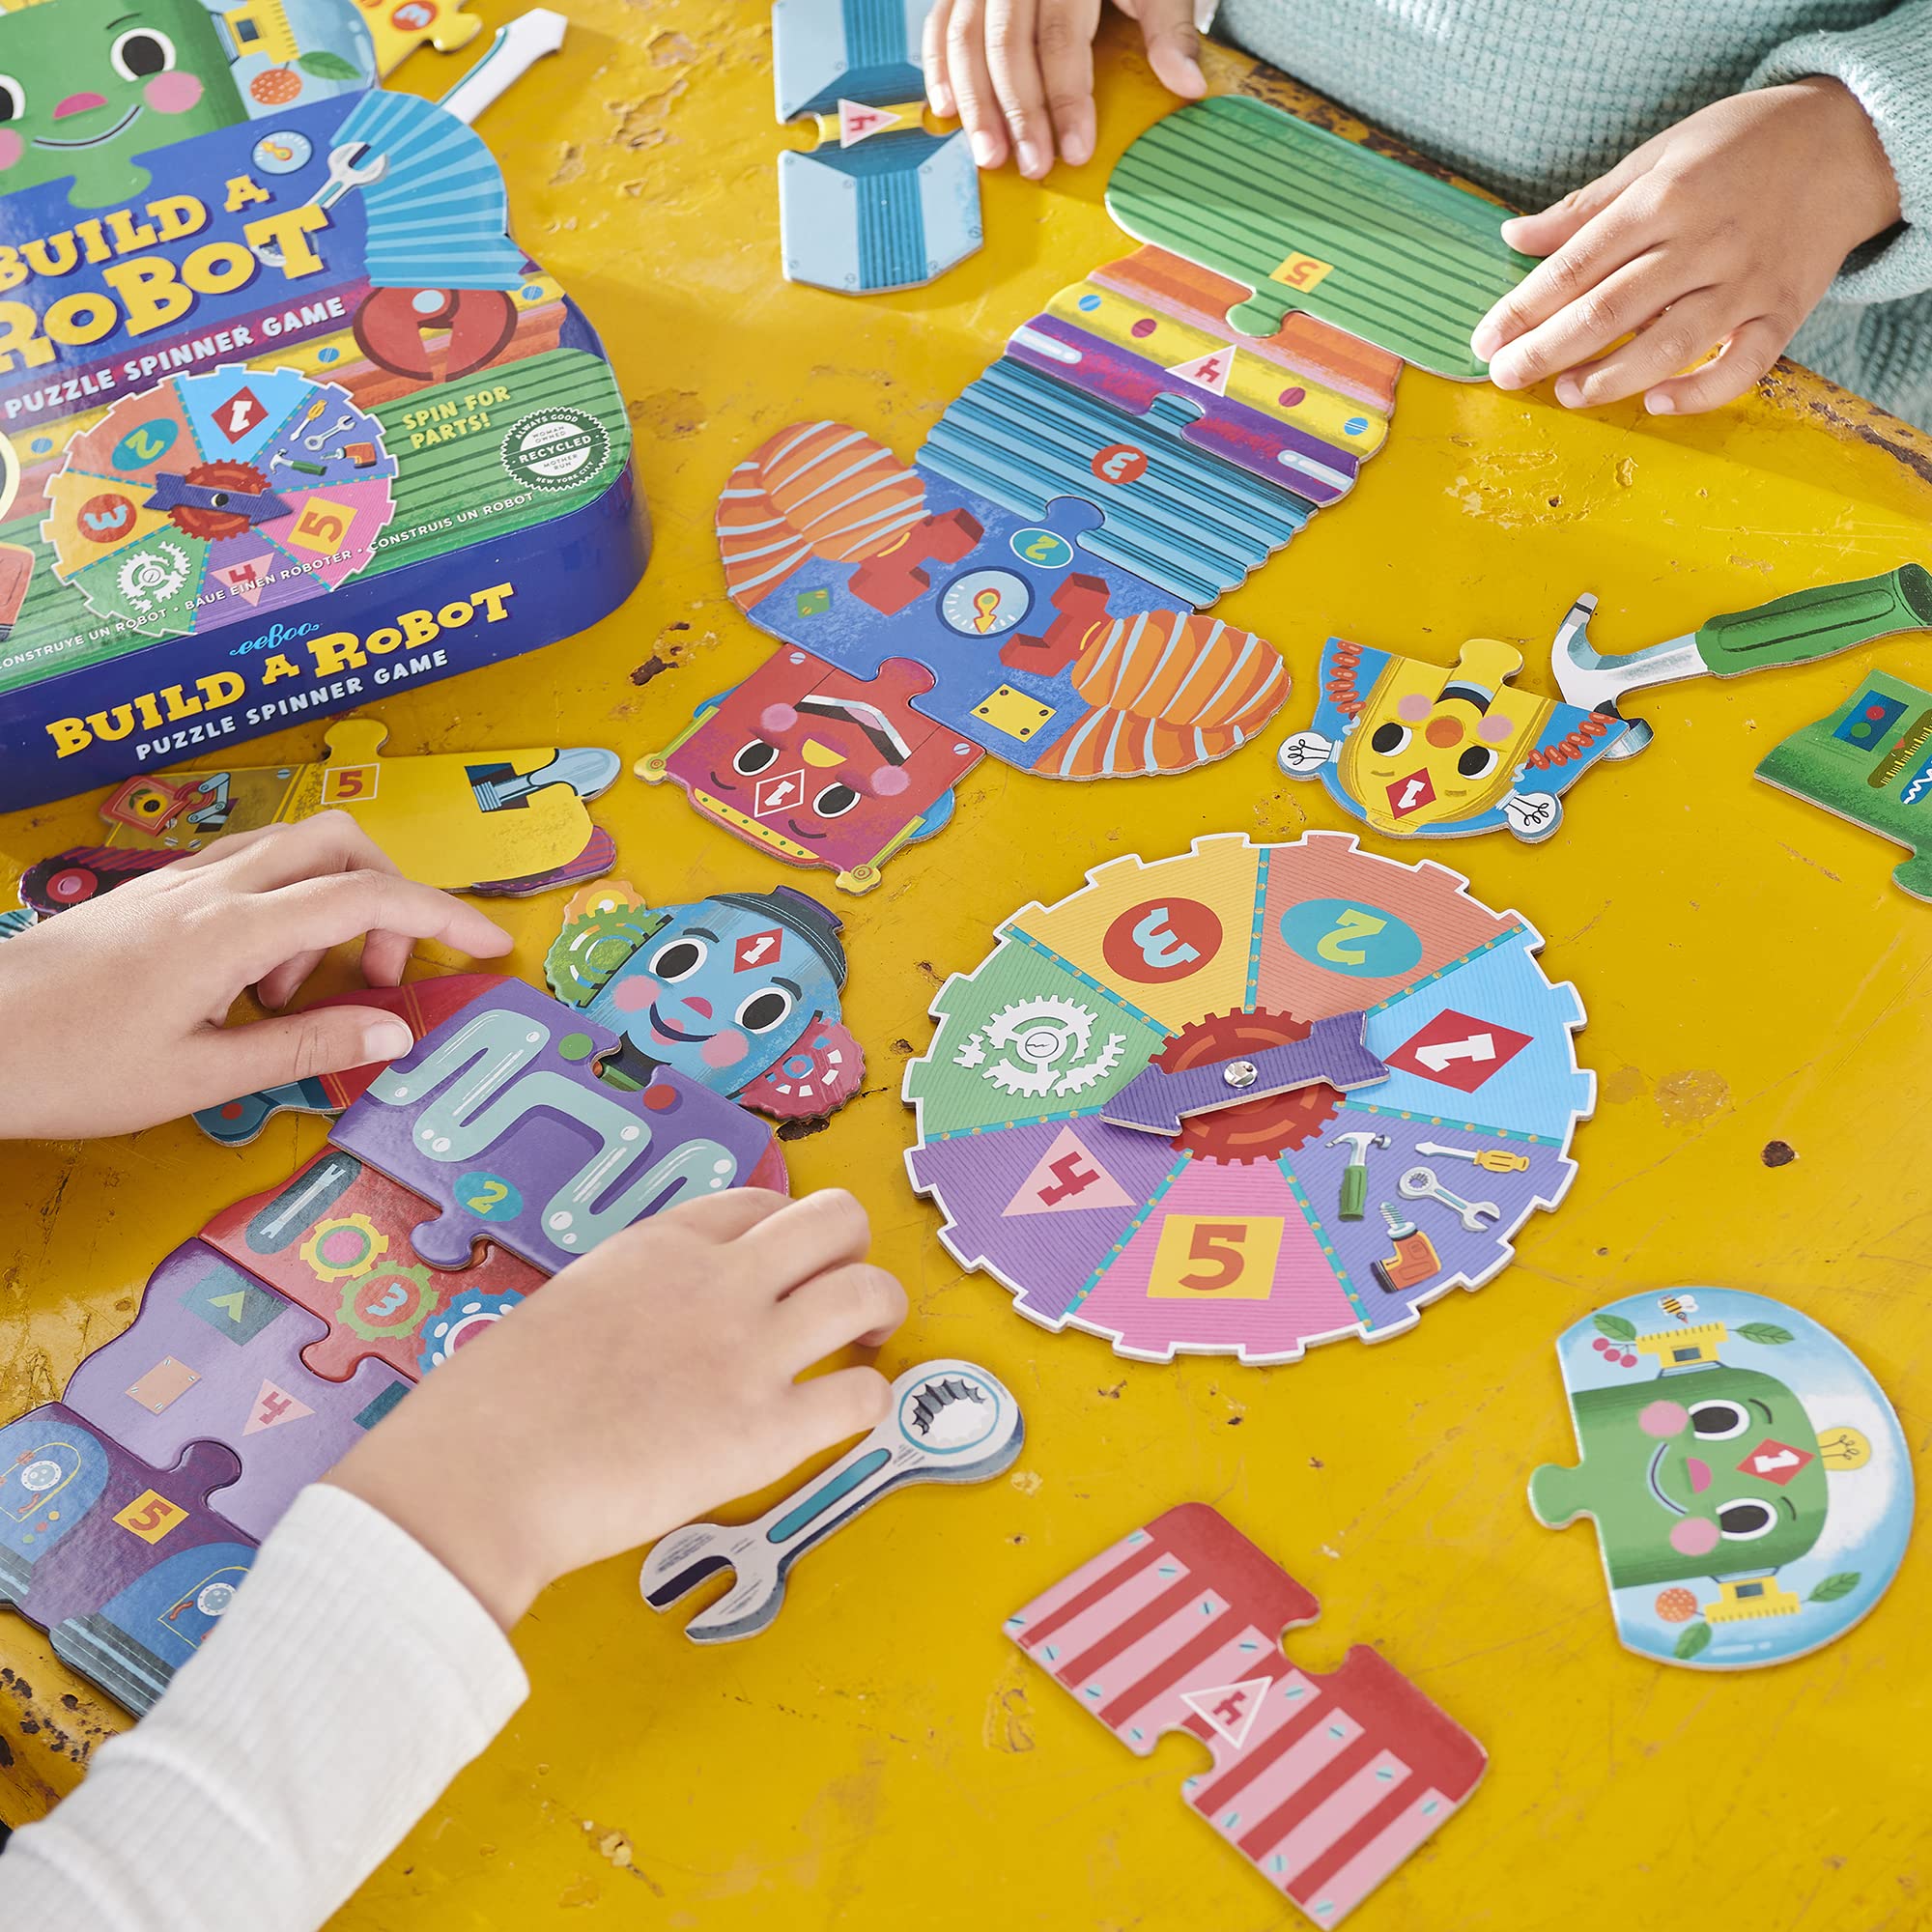 eeBoo: Build a Robot Spinner Game, Combines Simple Numbers with Fun, 2 to 4 Players, 15-30 Minute Play Time, Encourages Imaginative Play, For Ages 3 and up